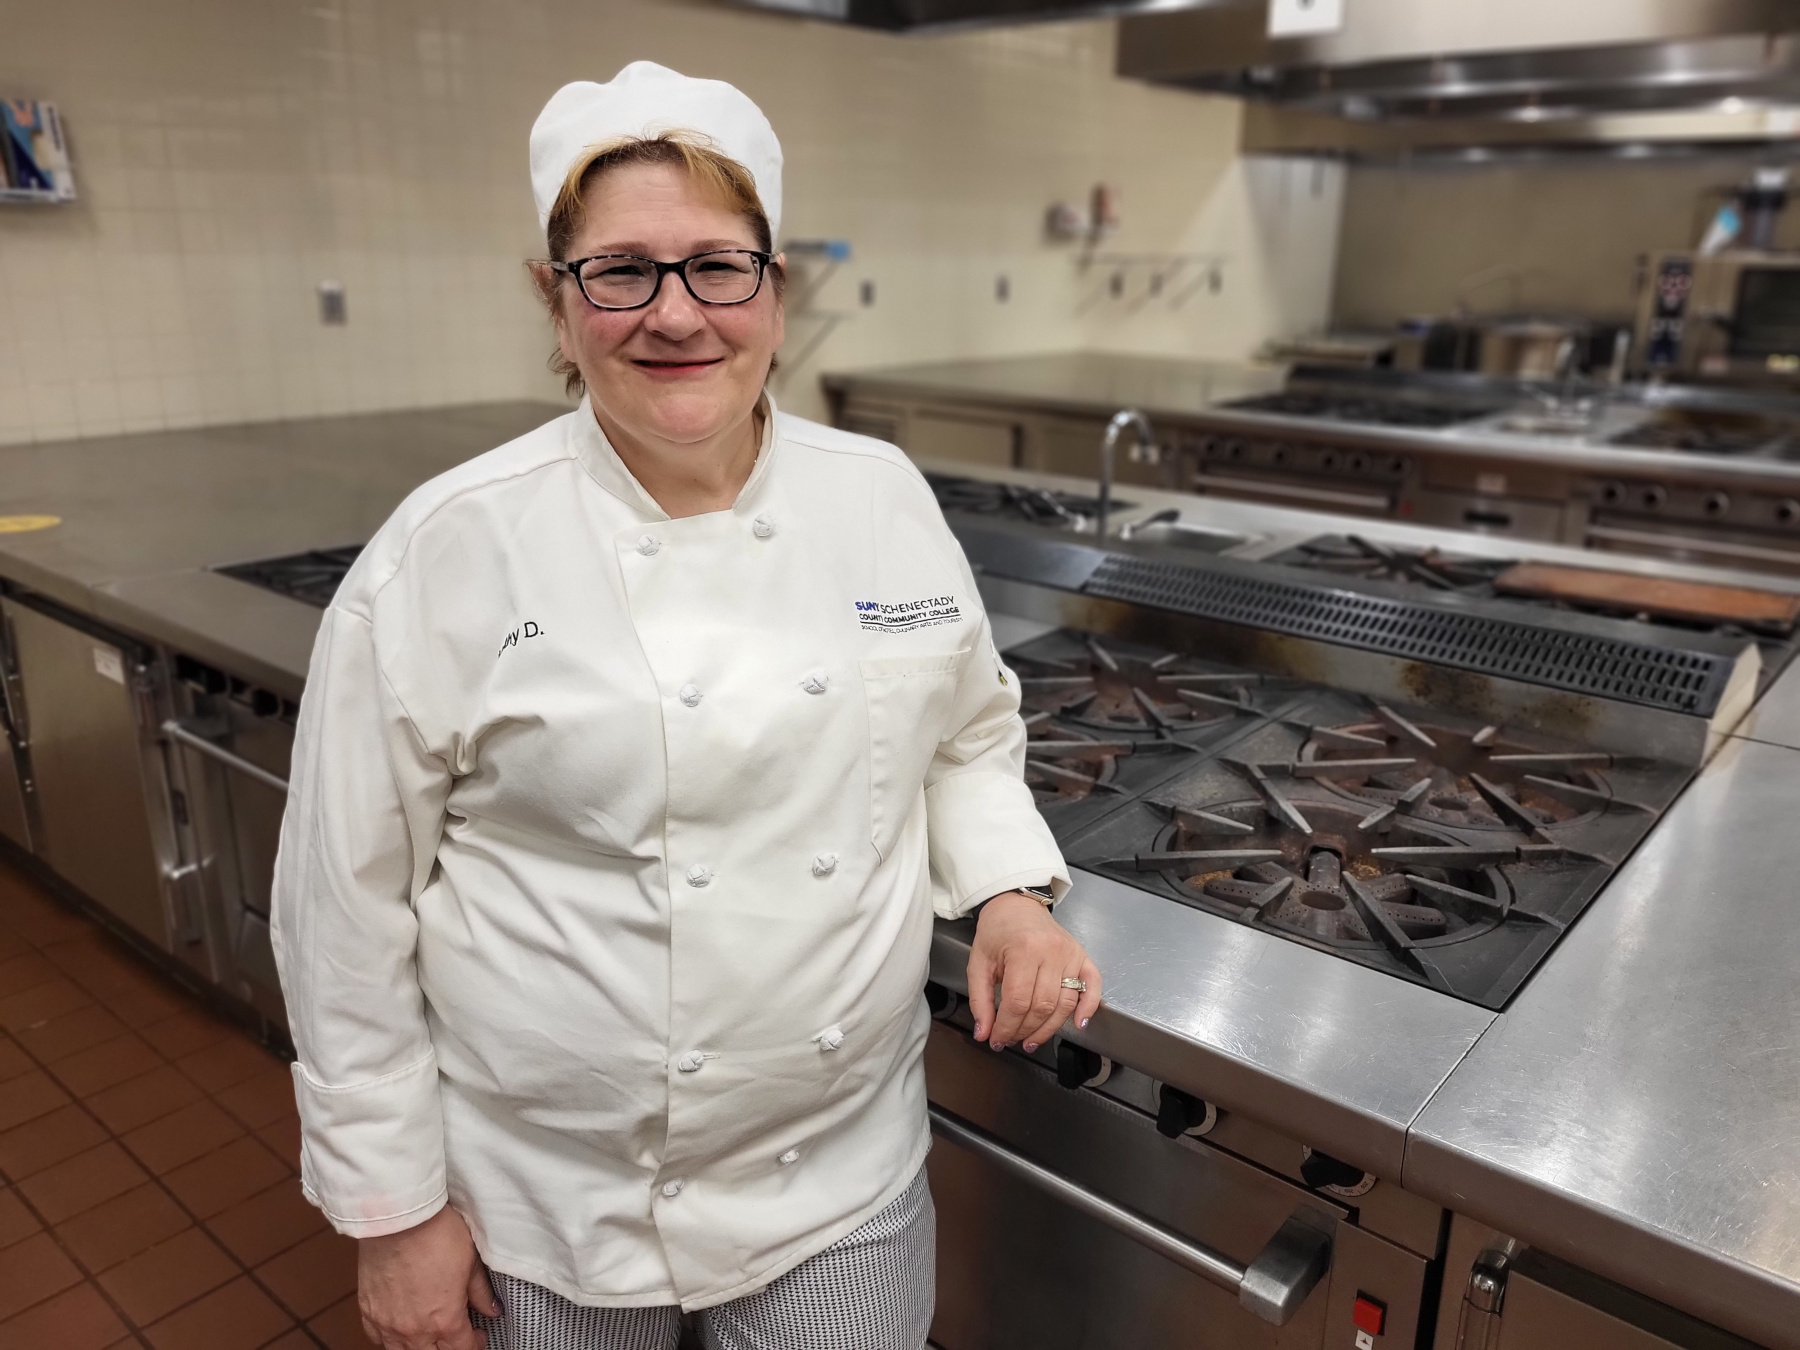 Katherine Duffy Darmetko in the culinary labs